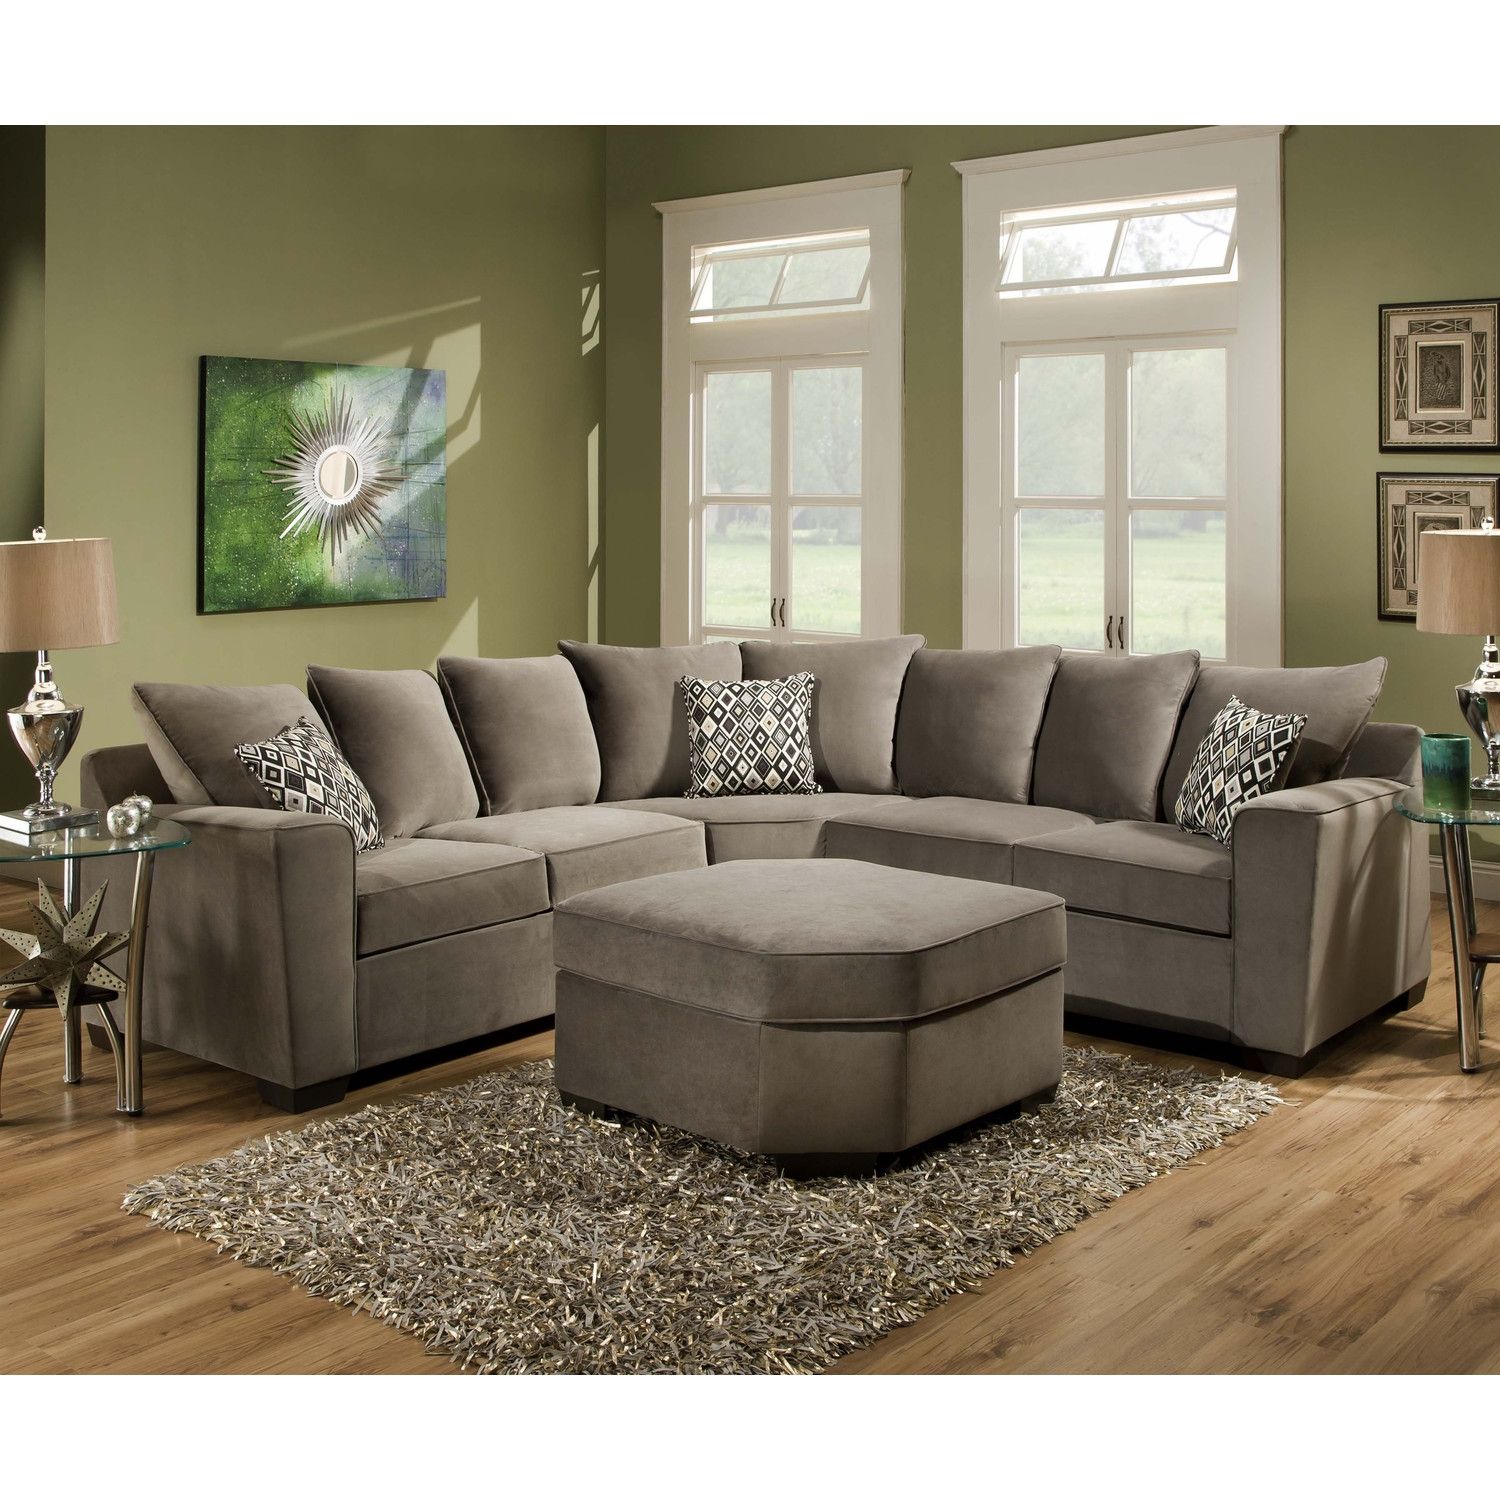 Furniture Comfy Design Of Oversized Couch For Charming Living Within Comfy Sectional Sofa (View 10 of 12)